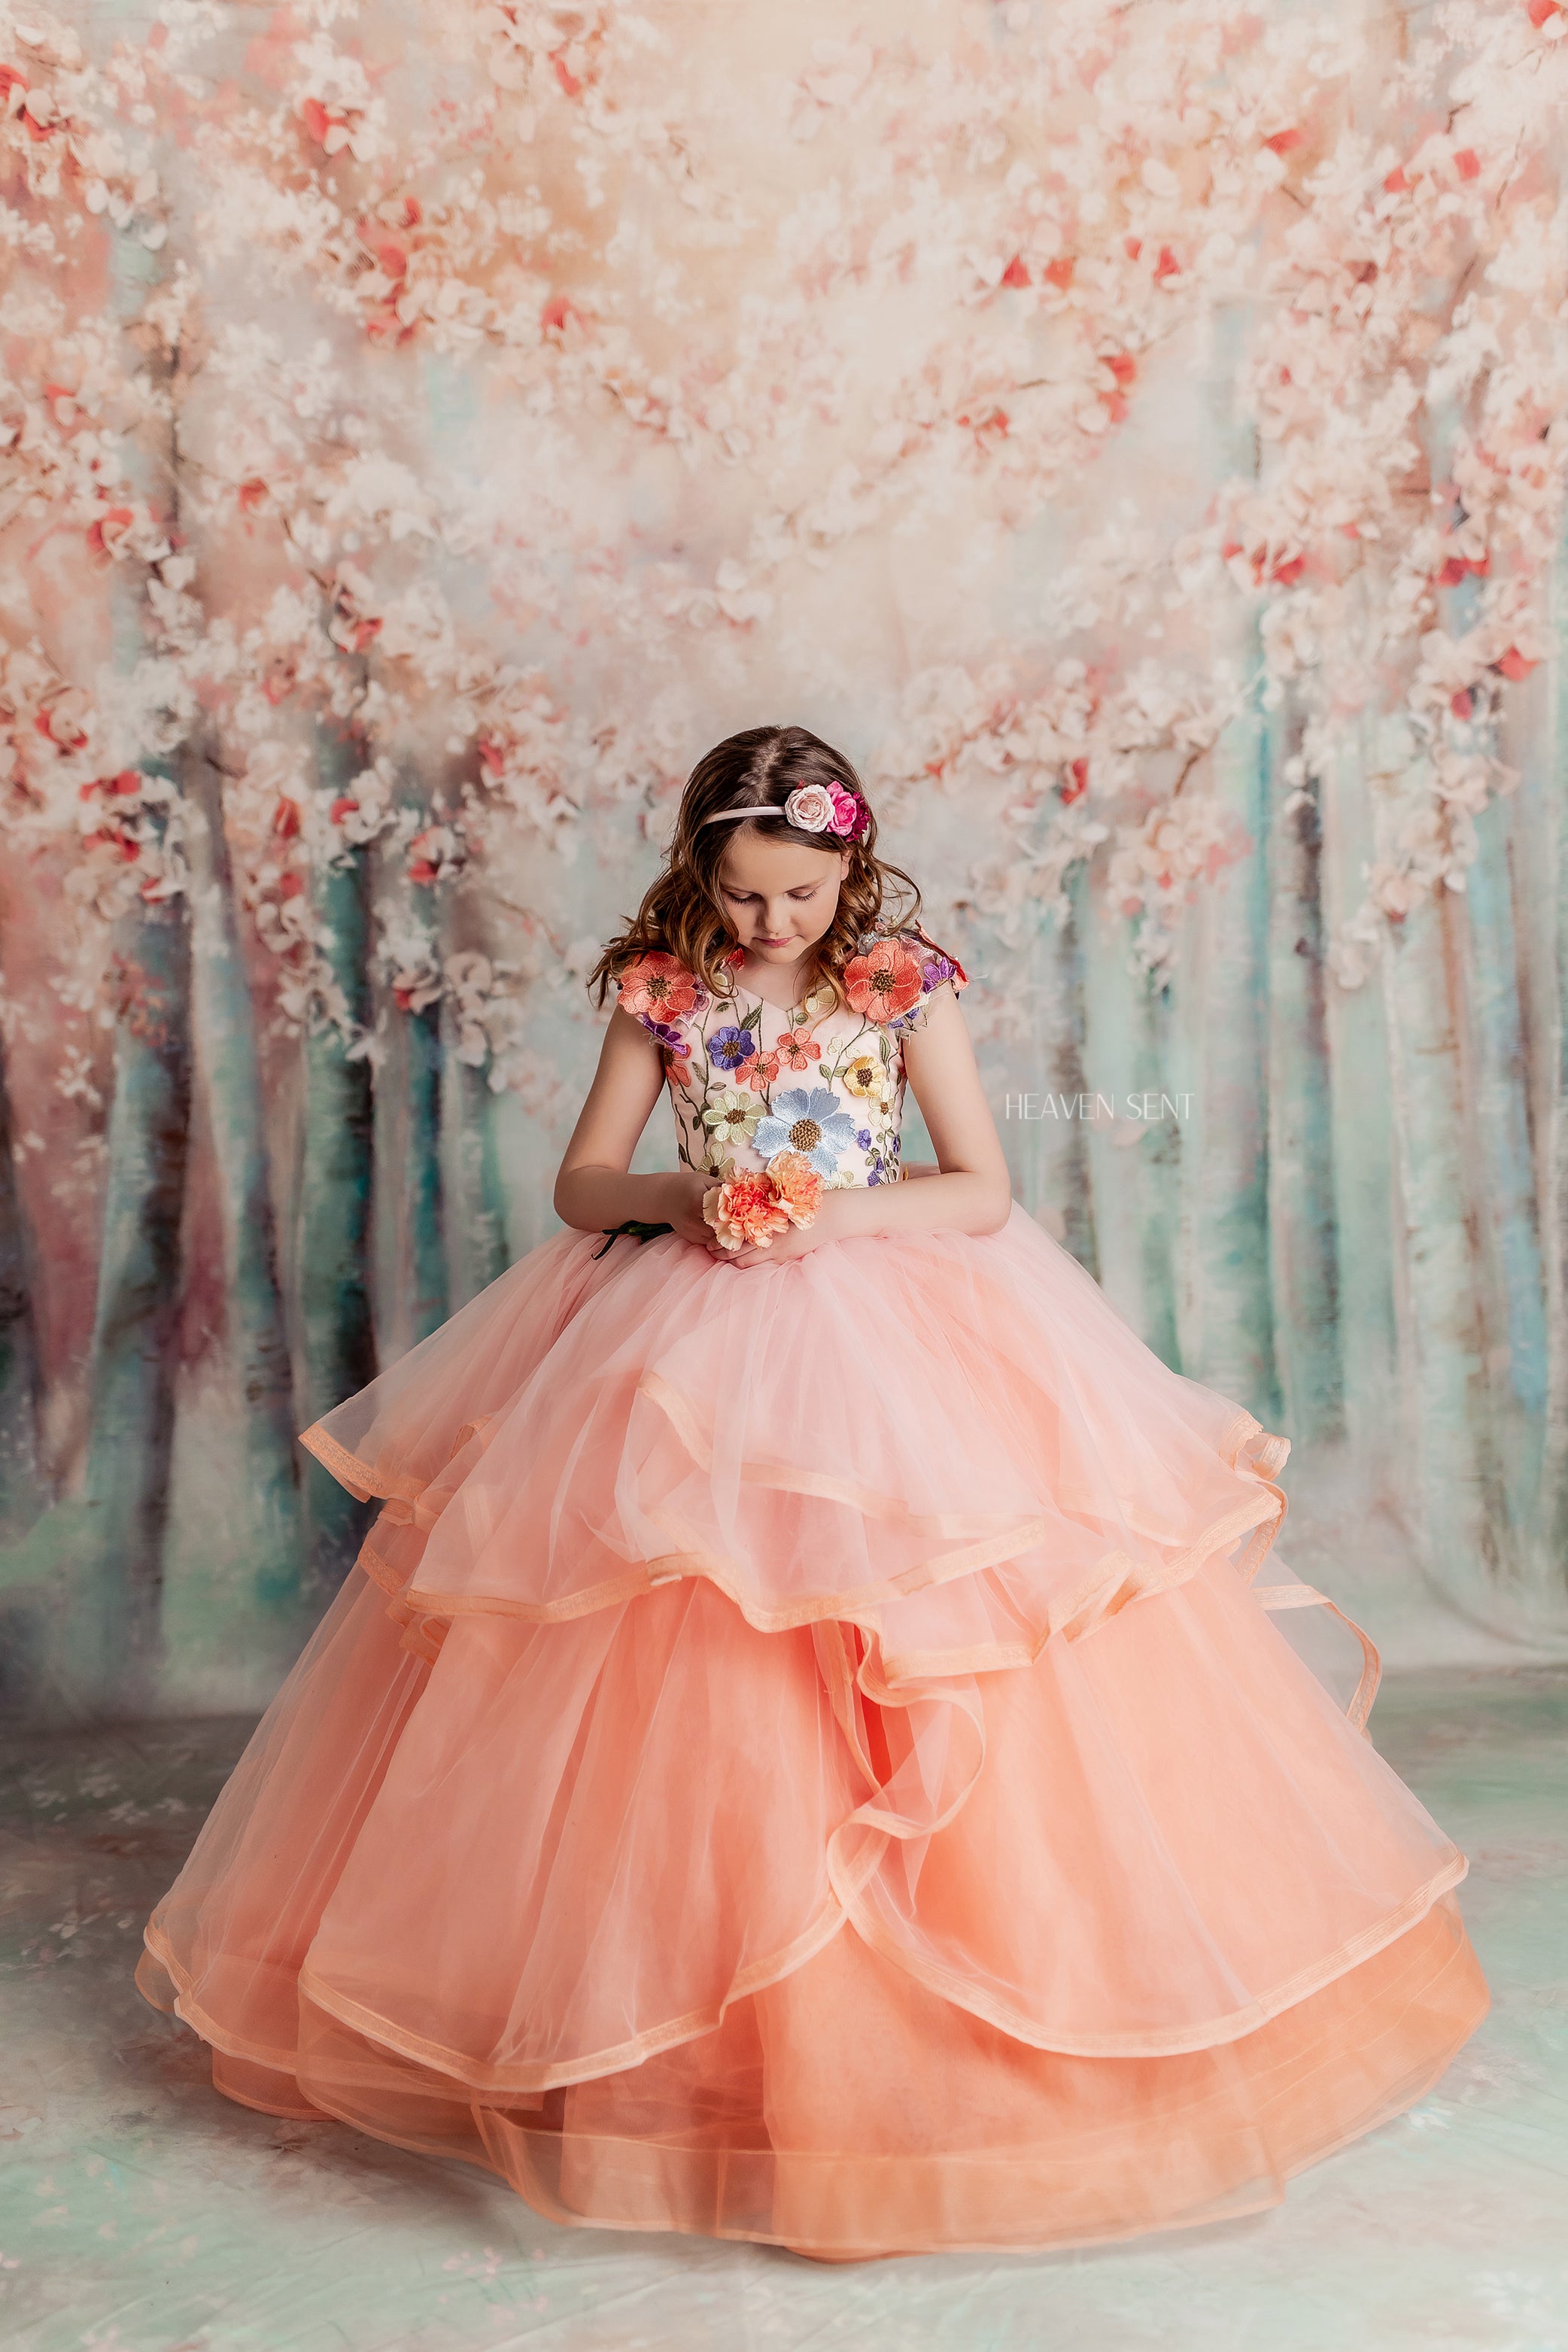 Flower Girl Childrens Bridesmaid Dresses For Weddings, Evening Parties, And  Summer Princess Style For Kids 8 14 Years Y19061501 From Baofu005, $33.13 |  DHgate.Com